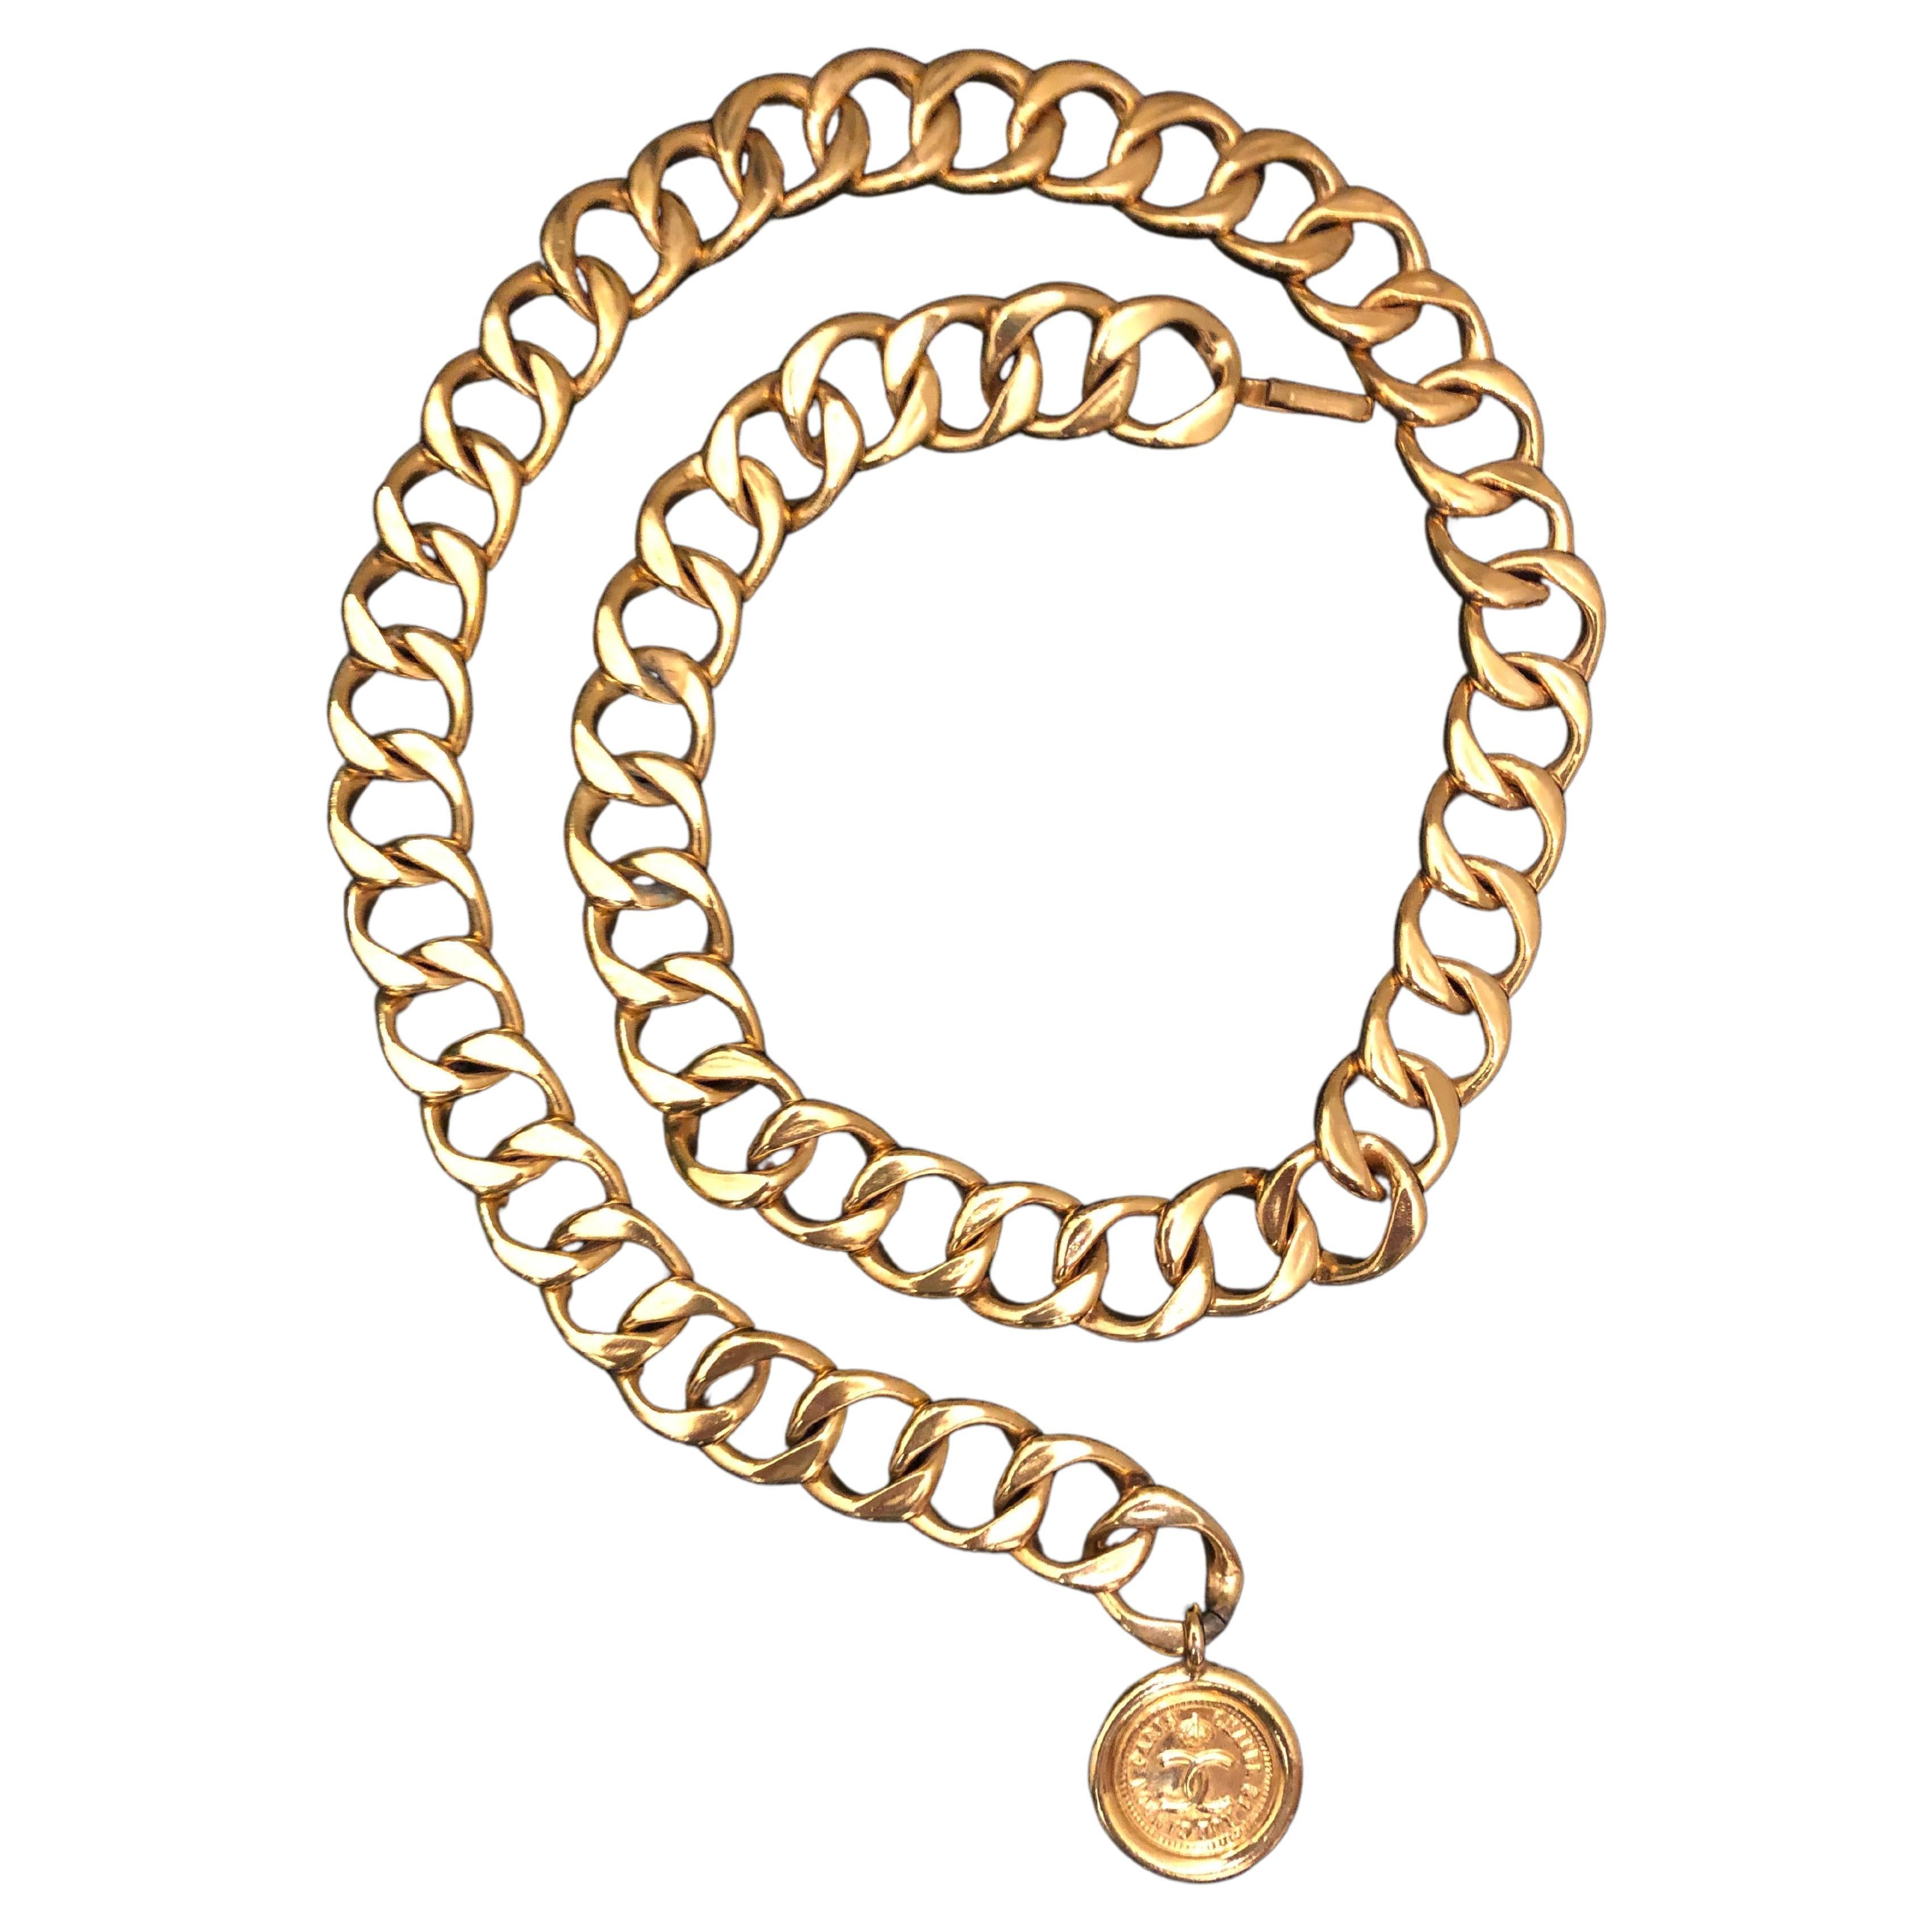 CHANEL 1993 Vintage Gold Tone Hammered Metal Chain Letters Necklace ...